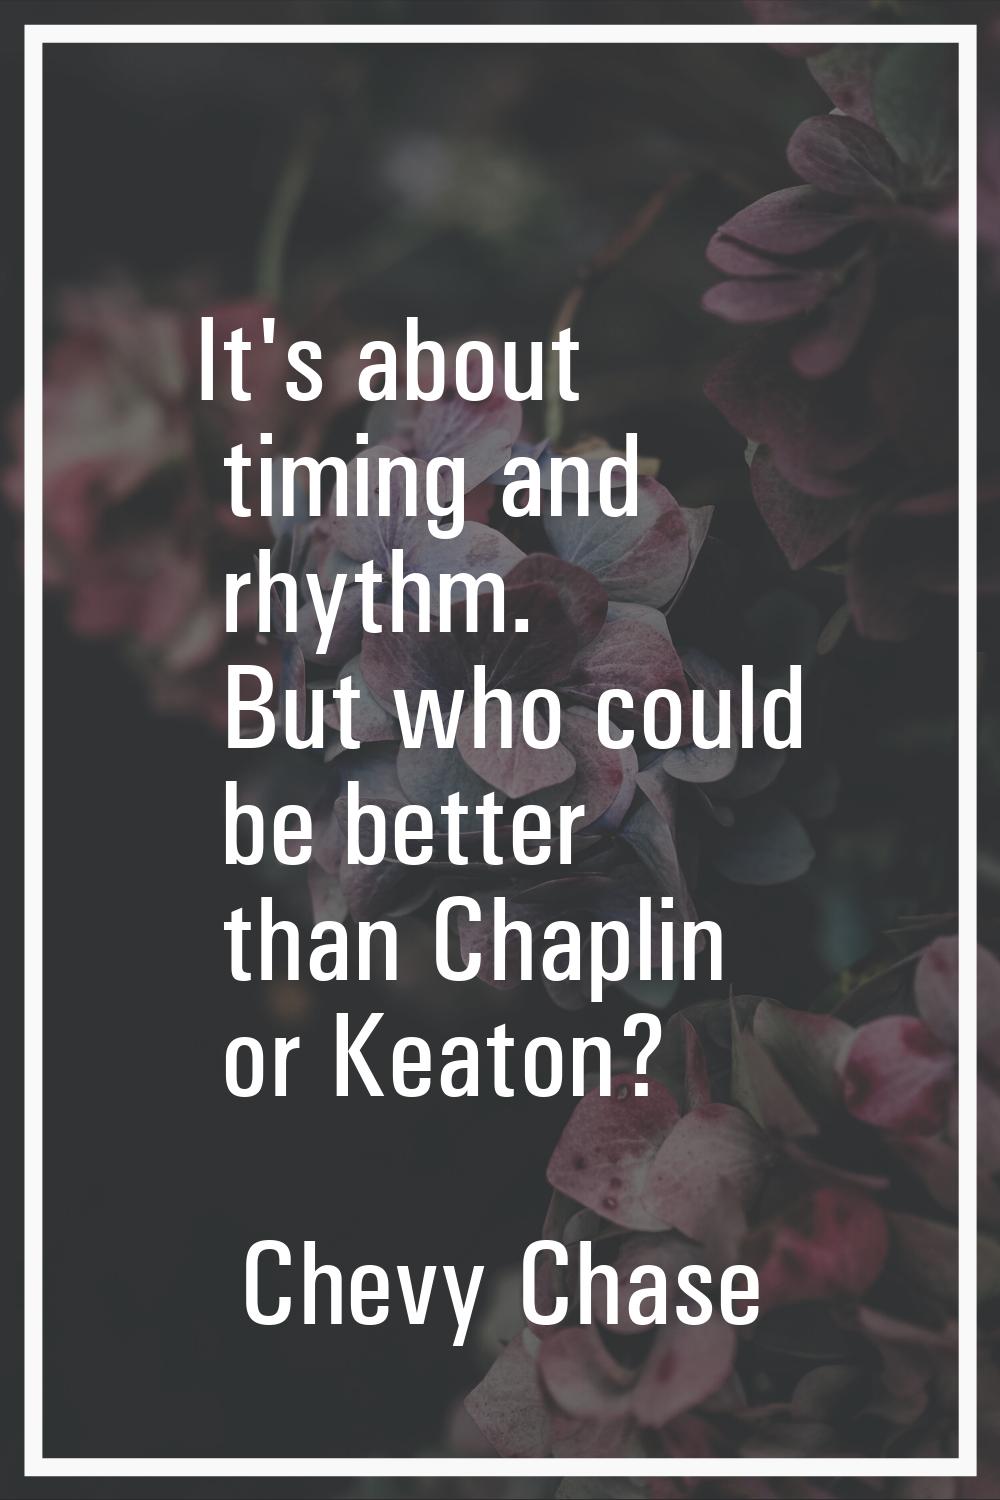 It's about timing and rhythm. But who could be better than Chaplin or Keaton?